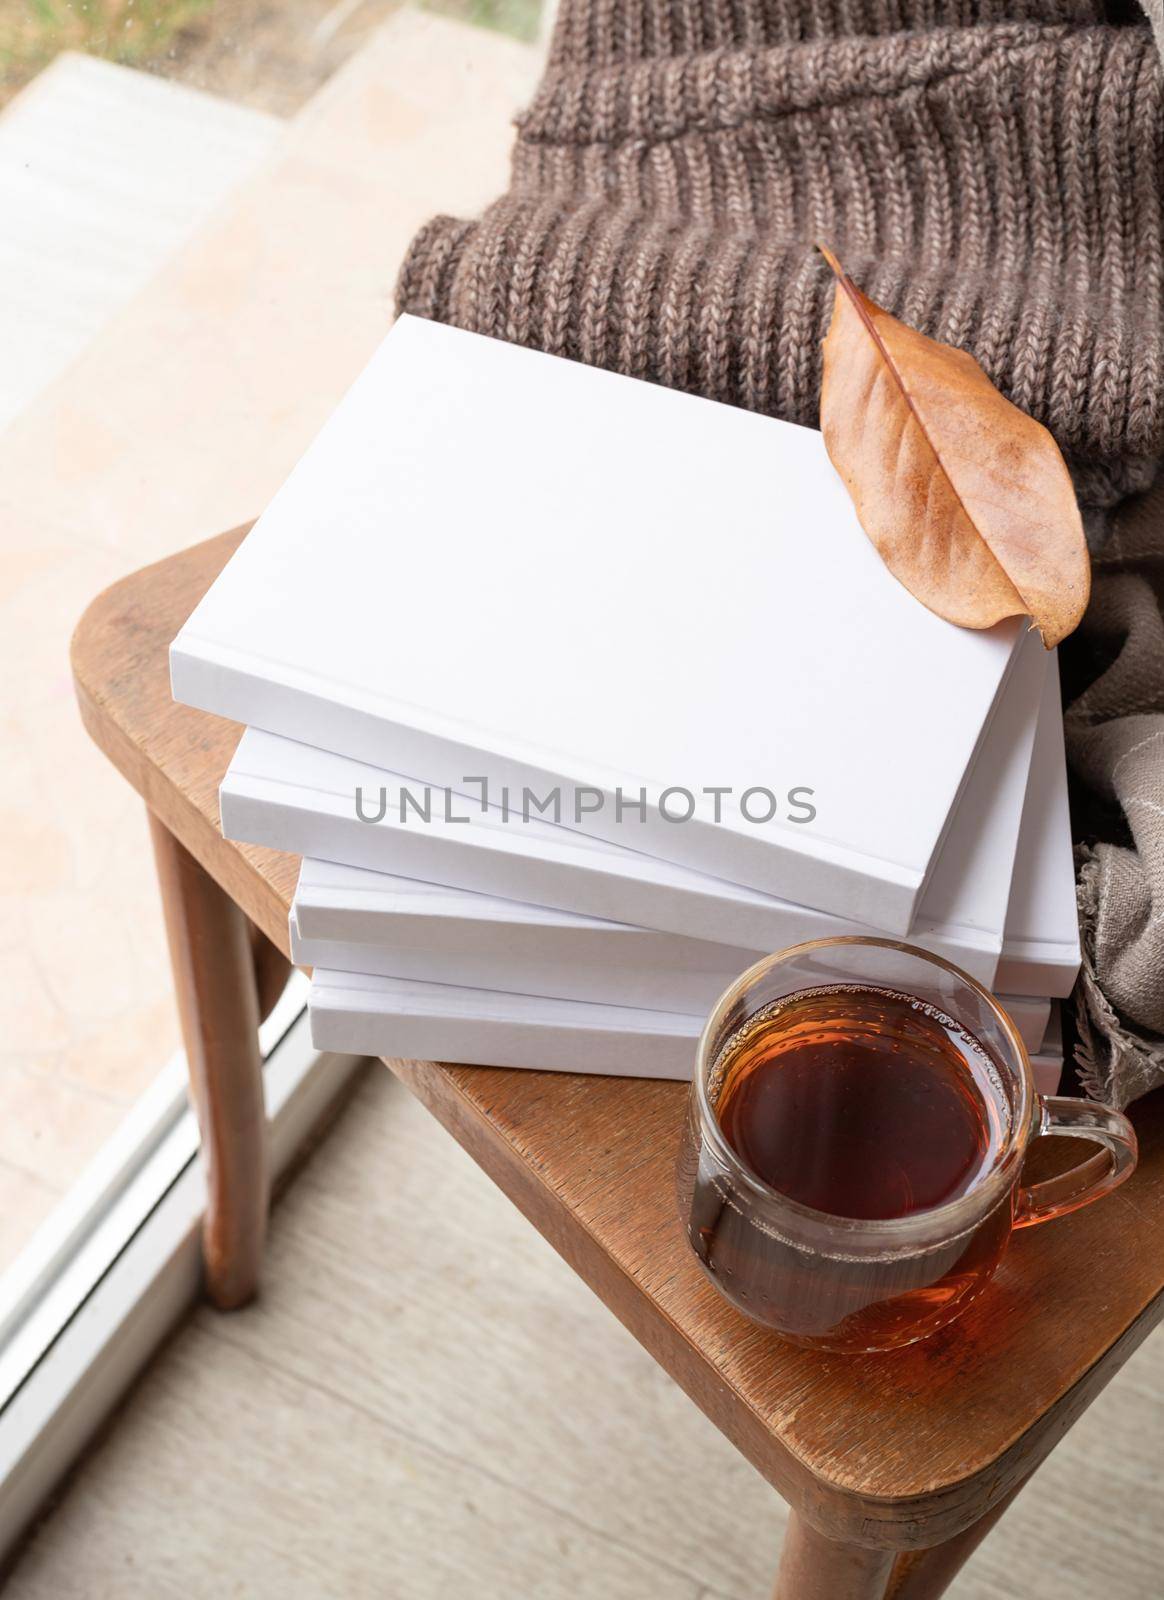 Back to school. Cozy autumn. Study and education concept. Stack of white blank books with autumn leaves and cup of hot tea on old wooden chair, mockup design